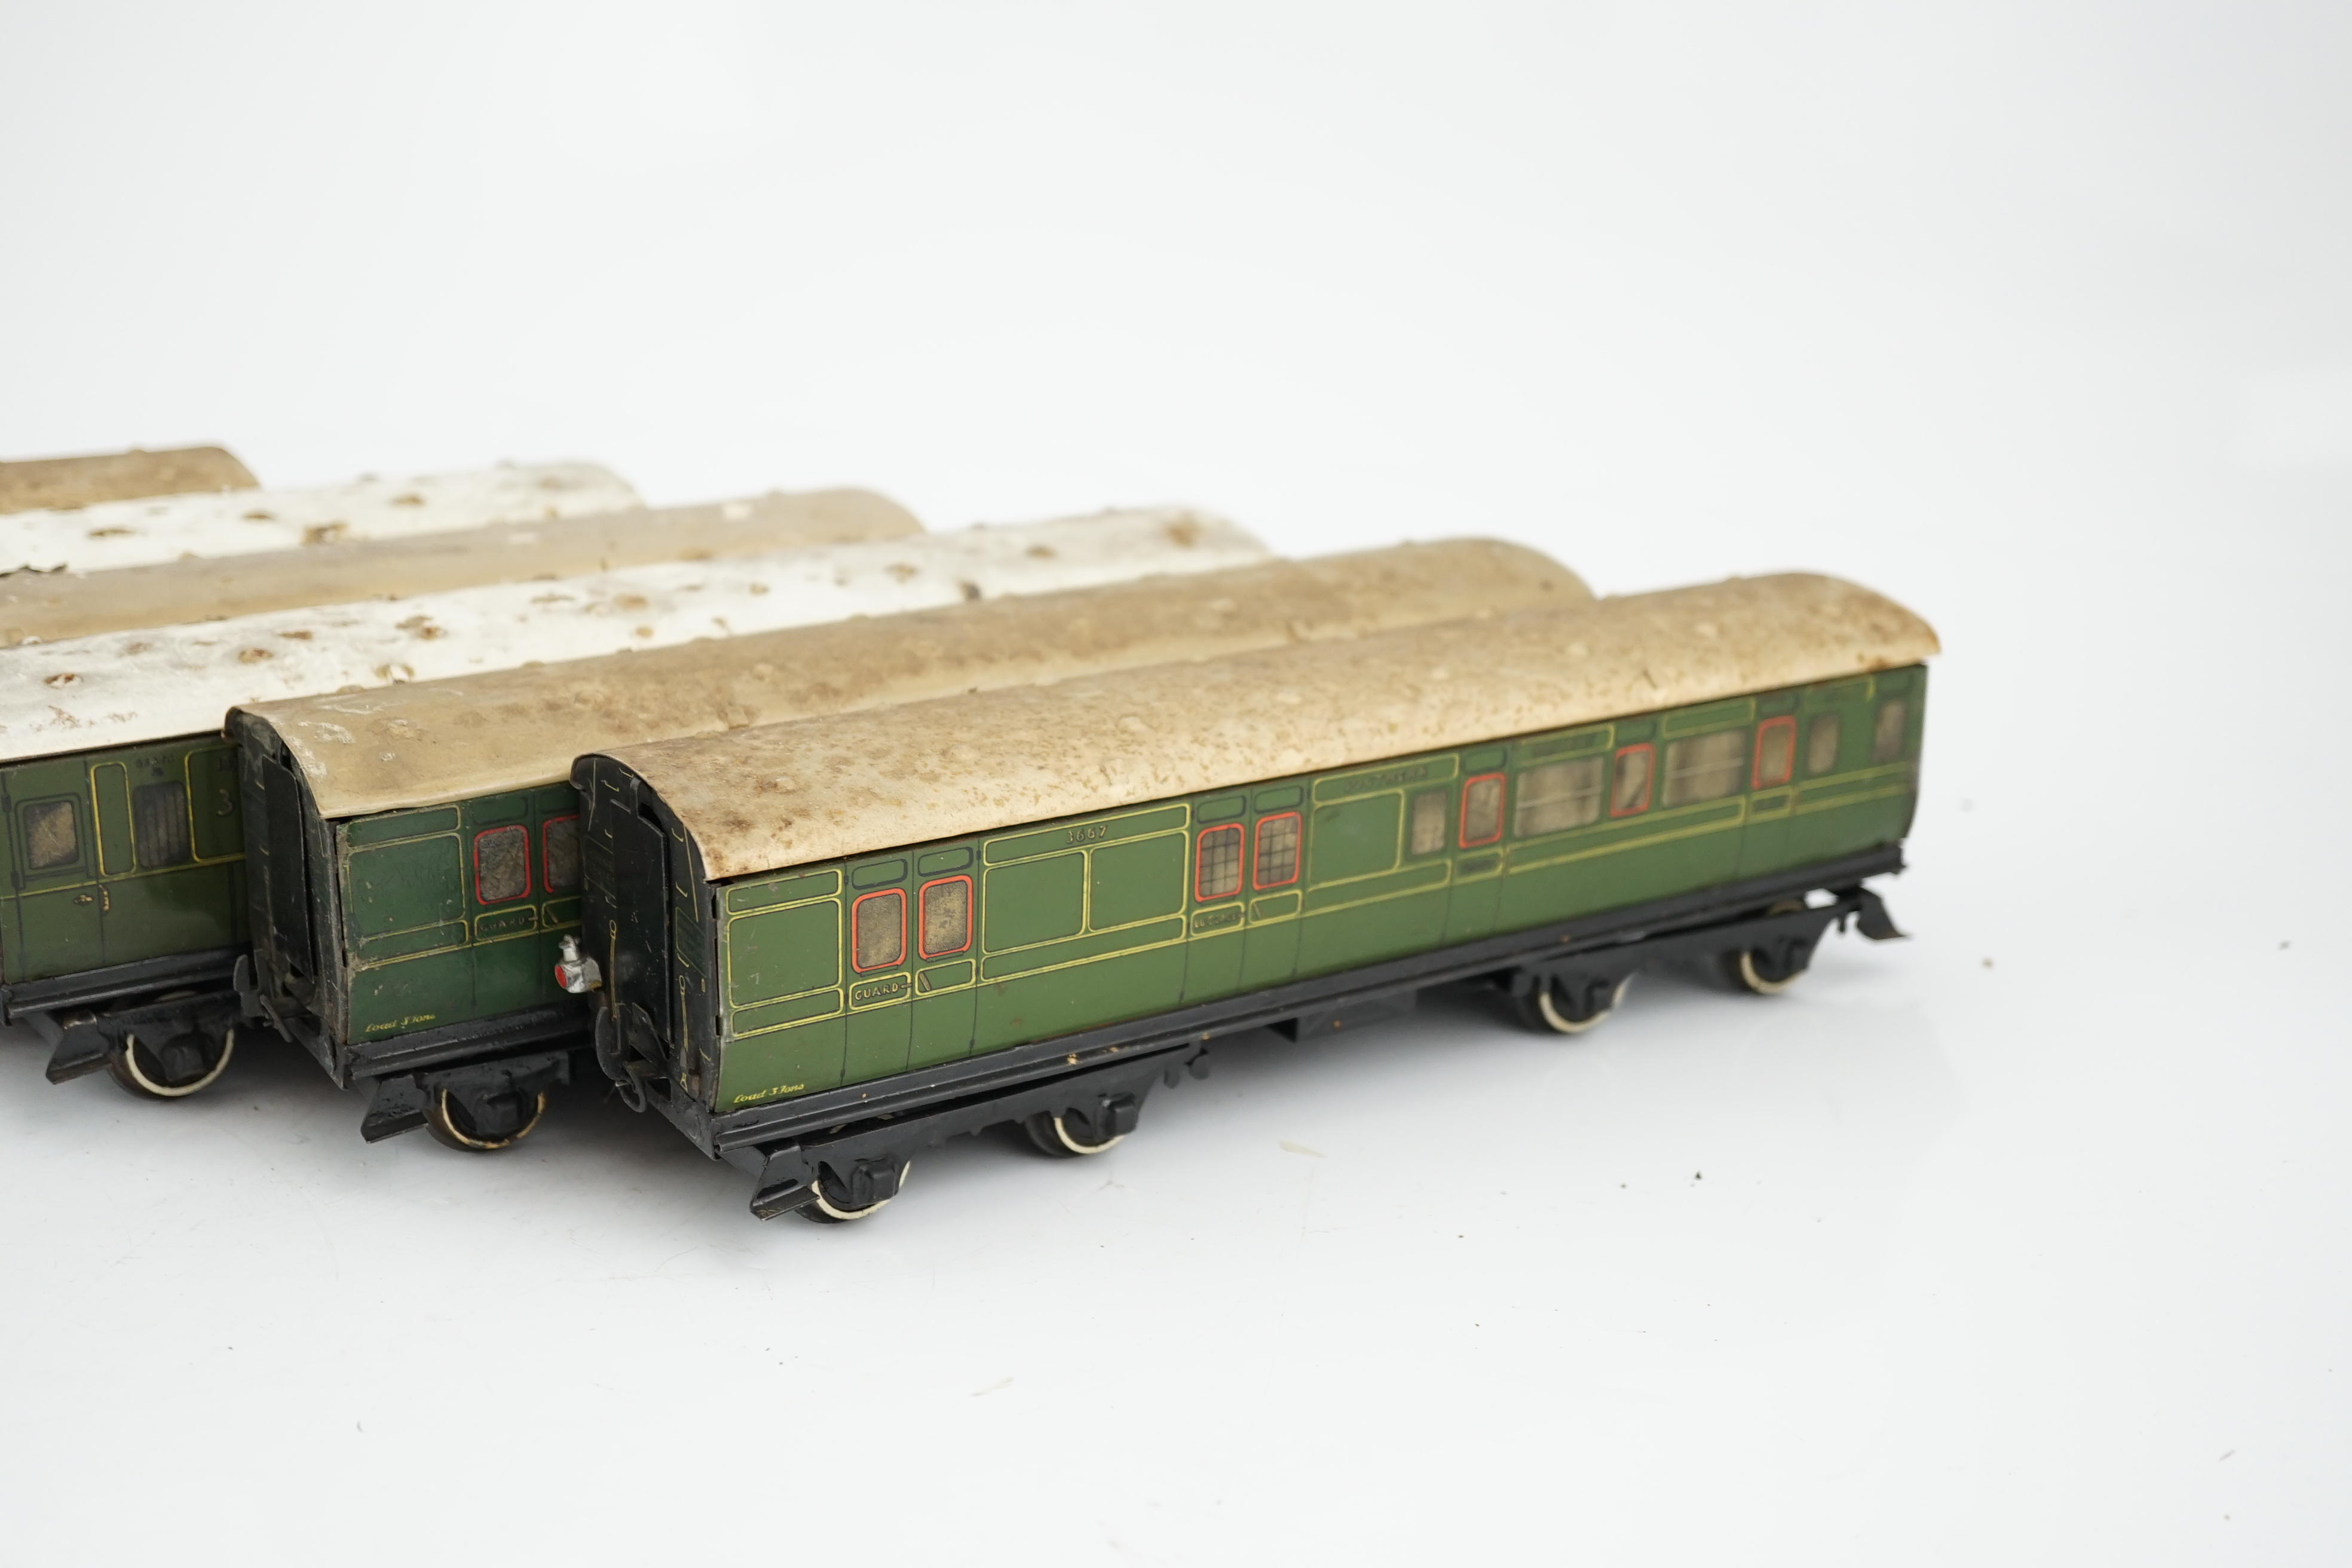 Six Hornby 0 gauge tinplate No.2 coaches in Southern Railway livery, one coach adapted to a driving unit with clockwork motor and replacement bogie